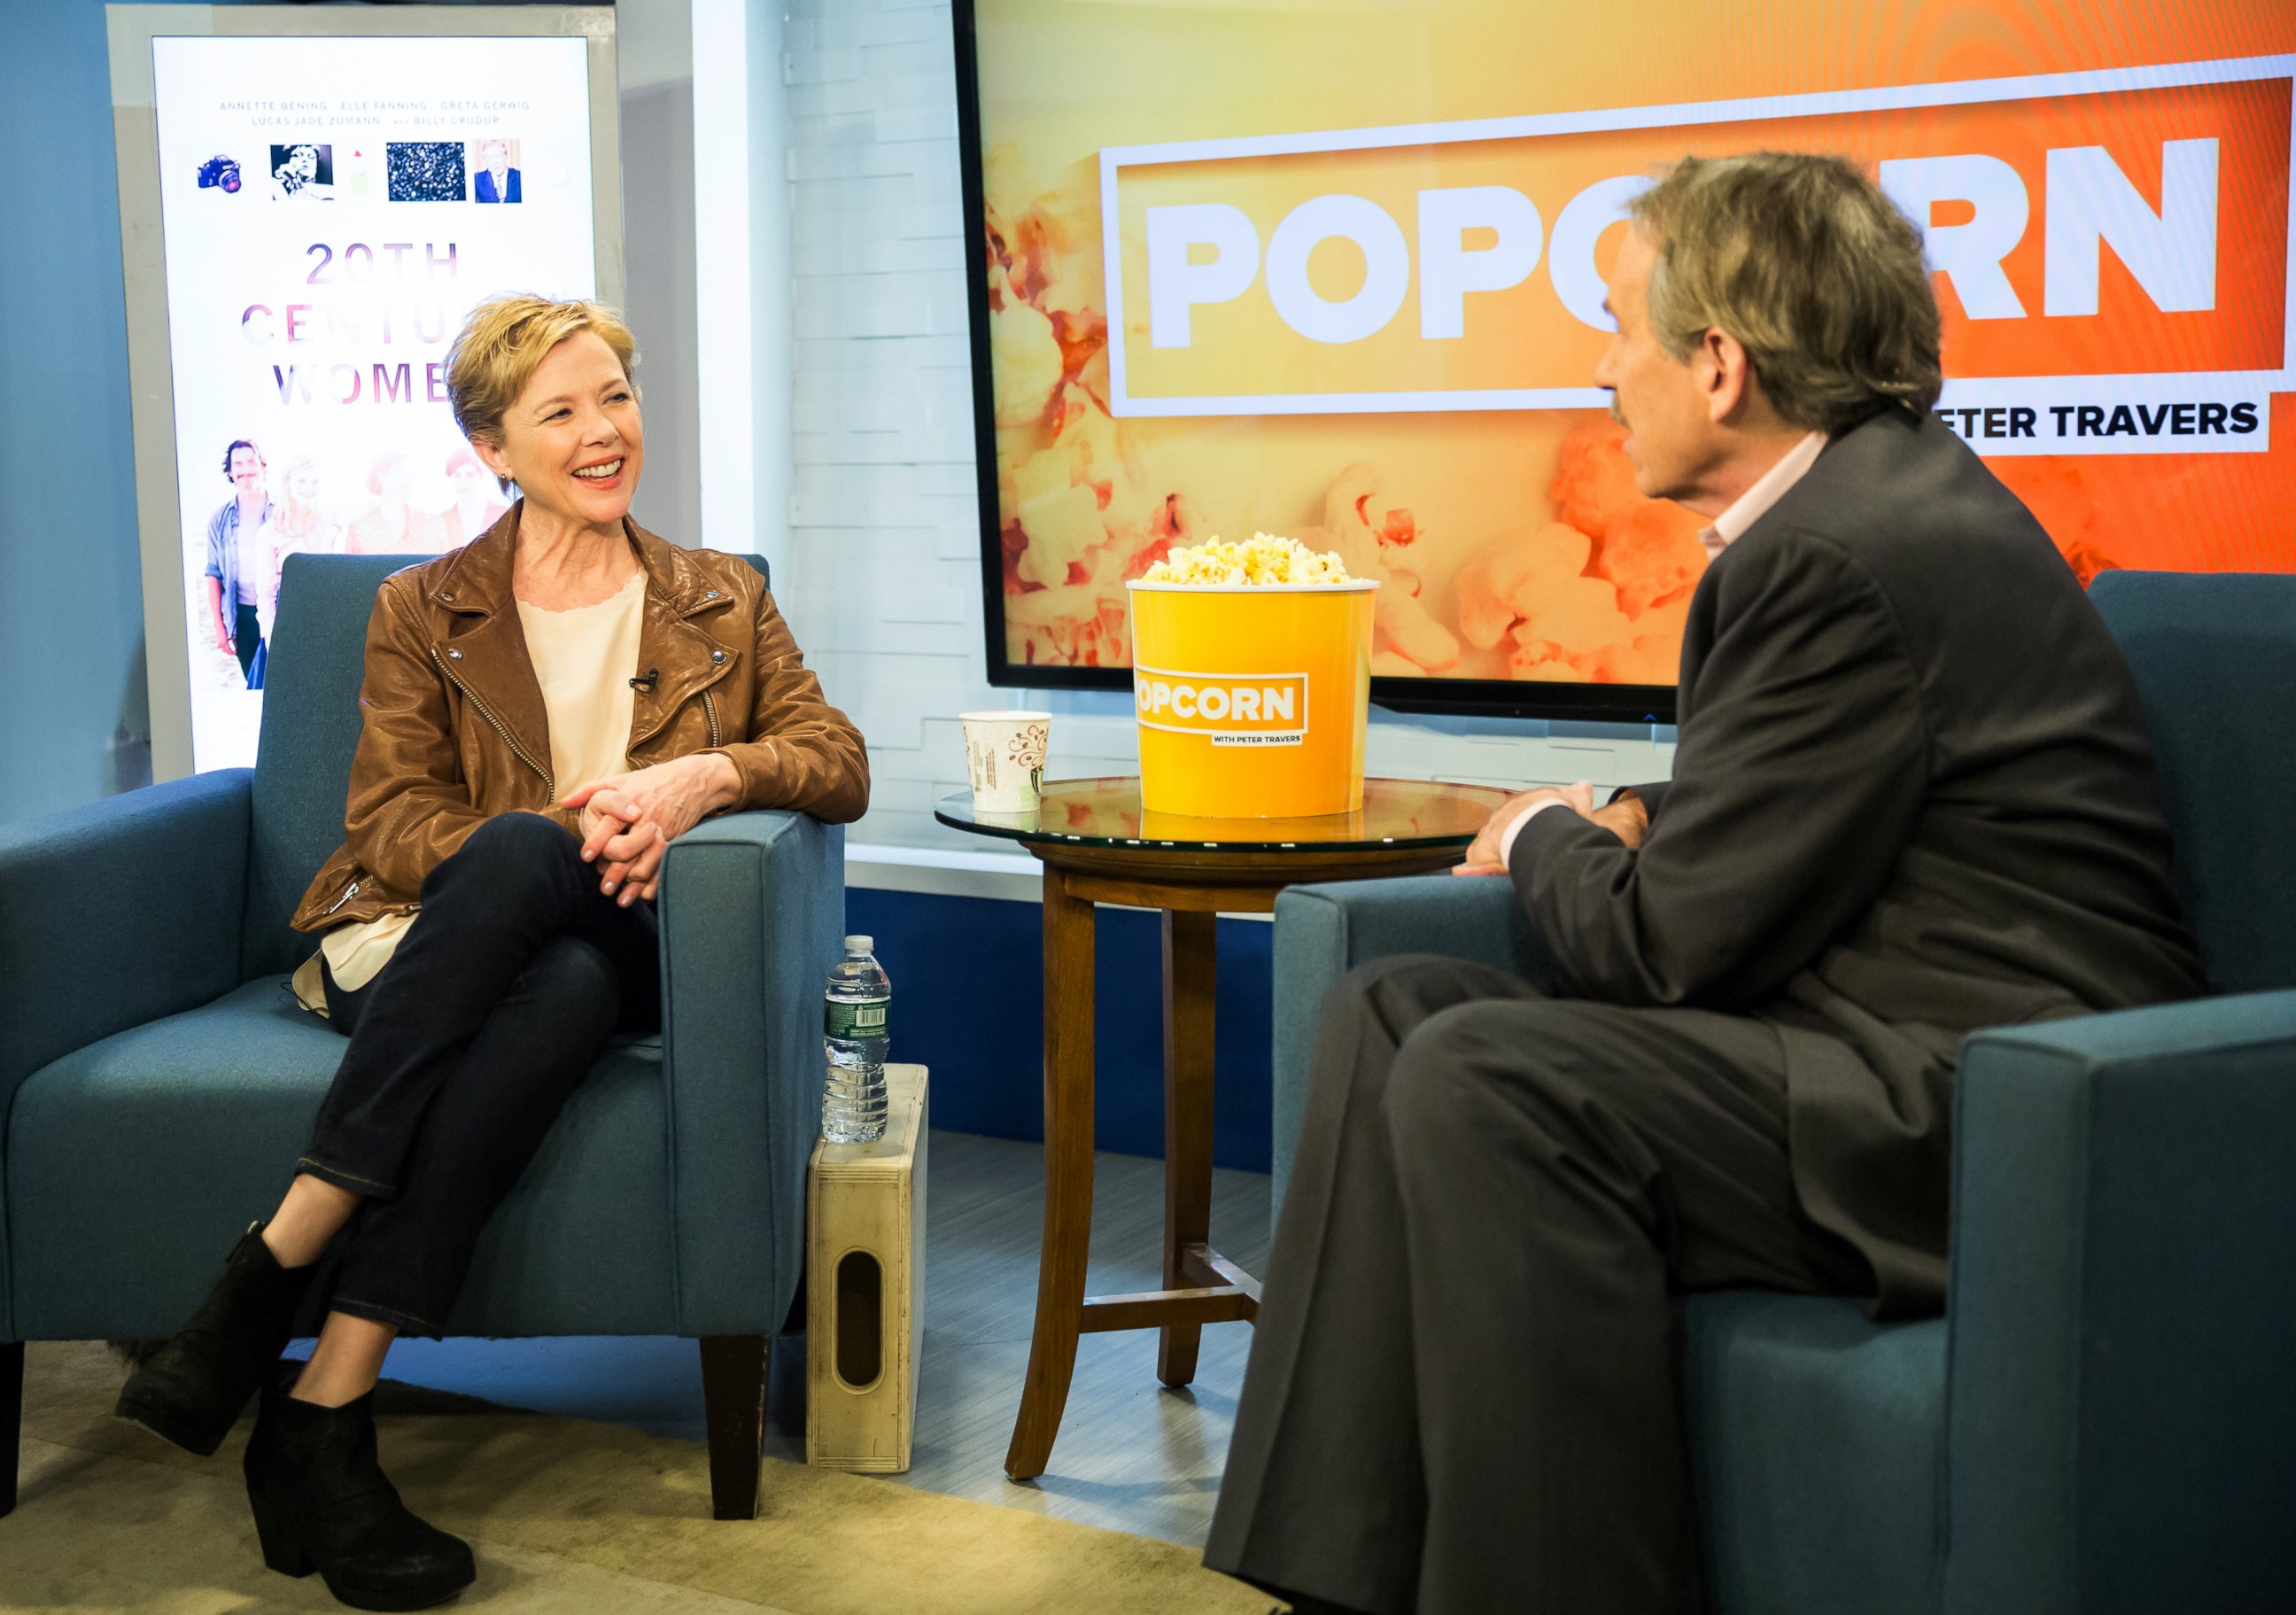 PHOTO: Annette Bening and Peter Travers at the ABC News studios in New York, Dec. 5, 2016.